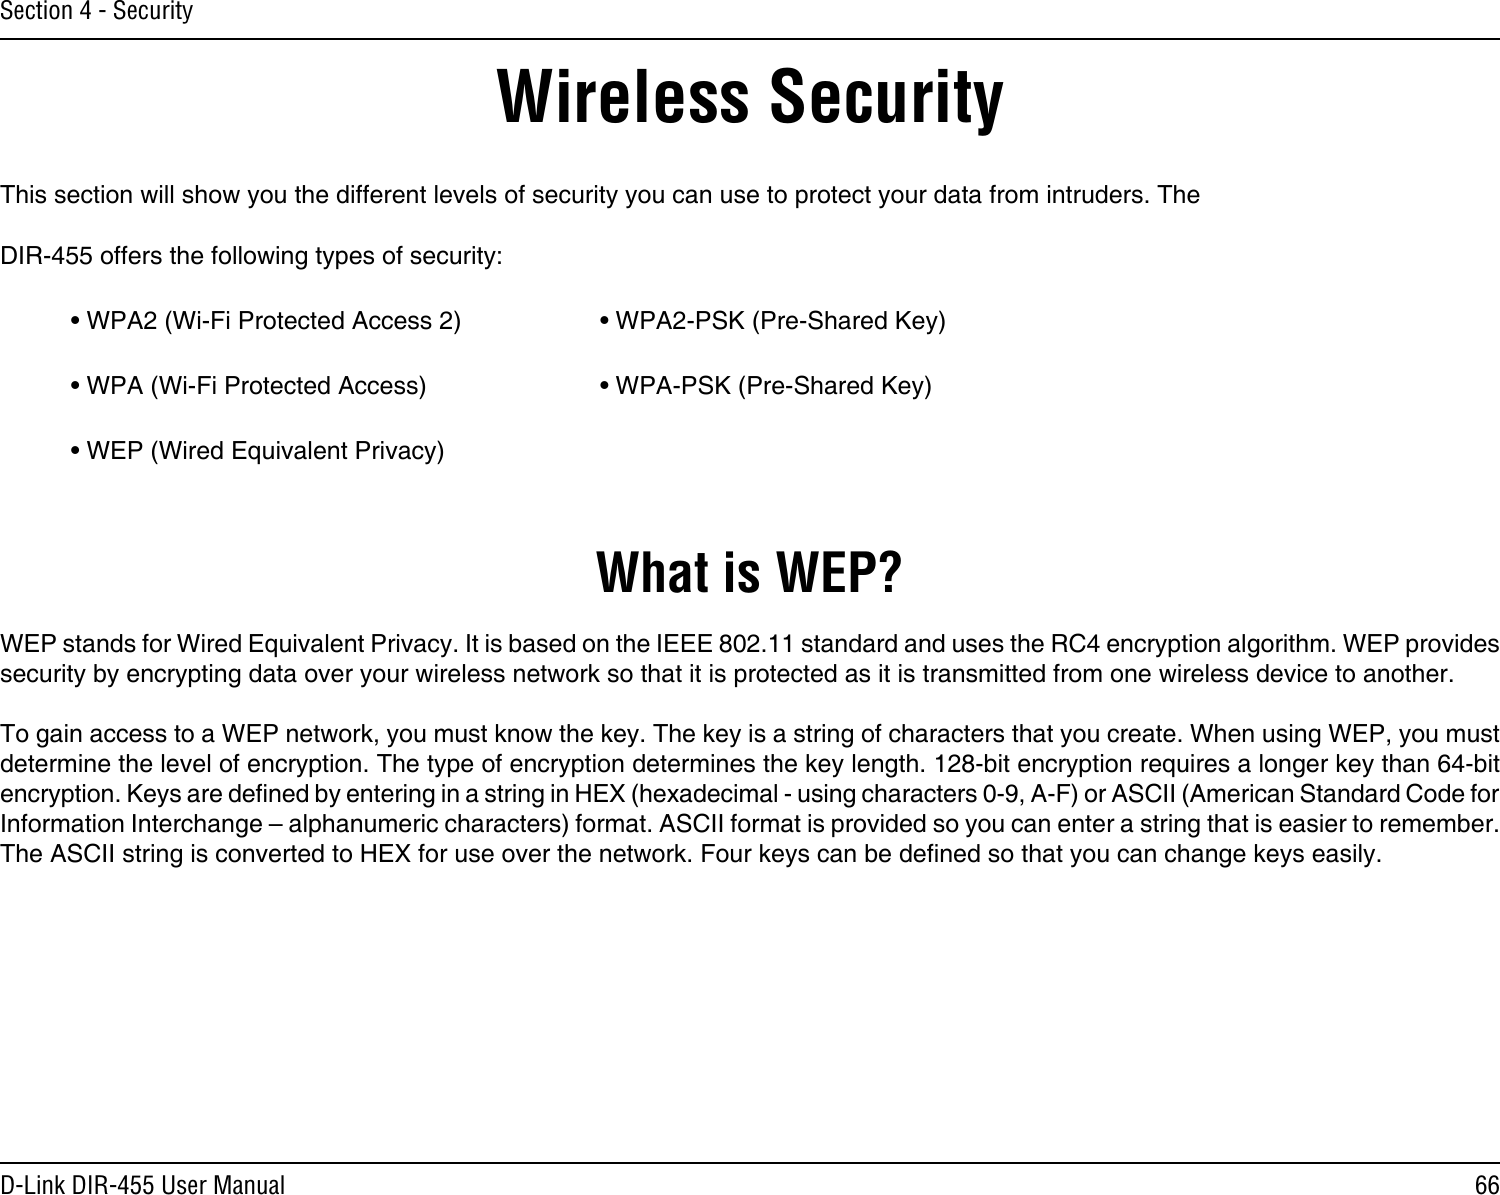 66D-Link DIR-455 User ManualSection 4 - SecurityWireless SecurityThis section will show you the different levels of security you can use to protect your data from intruders. The DIR-455 offers the following types of security:• WPA2 (Wi-Fi Protected Access 2)     • WPA2-PSK (Pre-Shared Key)• WPA (Wi-Fi Protected Access)      • WPA-PSK (Pre-Shared Key)• WEP (Wired Equivalent Privacy)What is WEP?WEP stands for Wired Equivalent Privacy. It is based on the IEEE 802.11 standard and uses the RC4 encryption algorithm. WEP provides security by encrypting data over your wireless network so that it is protected as it is transmitted from one wireless device to another.To gain access to a WEP network, you must know the key. The key is a string of characters that you create. When using WEP, you must determine the level of encryption. The type of encryption determines the key length. 128-bit encryption requires a longer key than 64-bit encryption. Keys are dened by entering in a string in HEX (hexadecimal - using characters 0-9, A-F) or ASCII (American Standard Code for Information Interchange – alphanumeric characters) format. ASCII format is provided so you can enter a string that is easier to remember. The ASCII string is converted to HEX for use over the network. Four keys can be dened so that you can change keys easily.